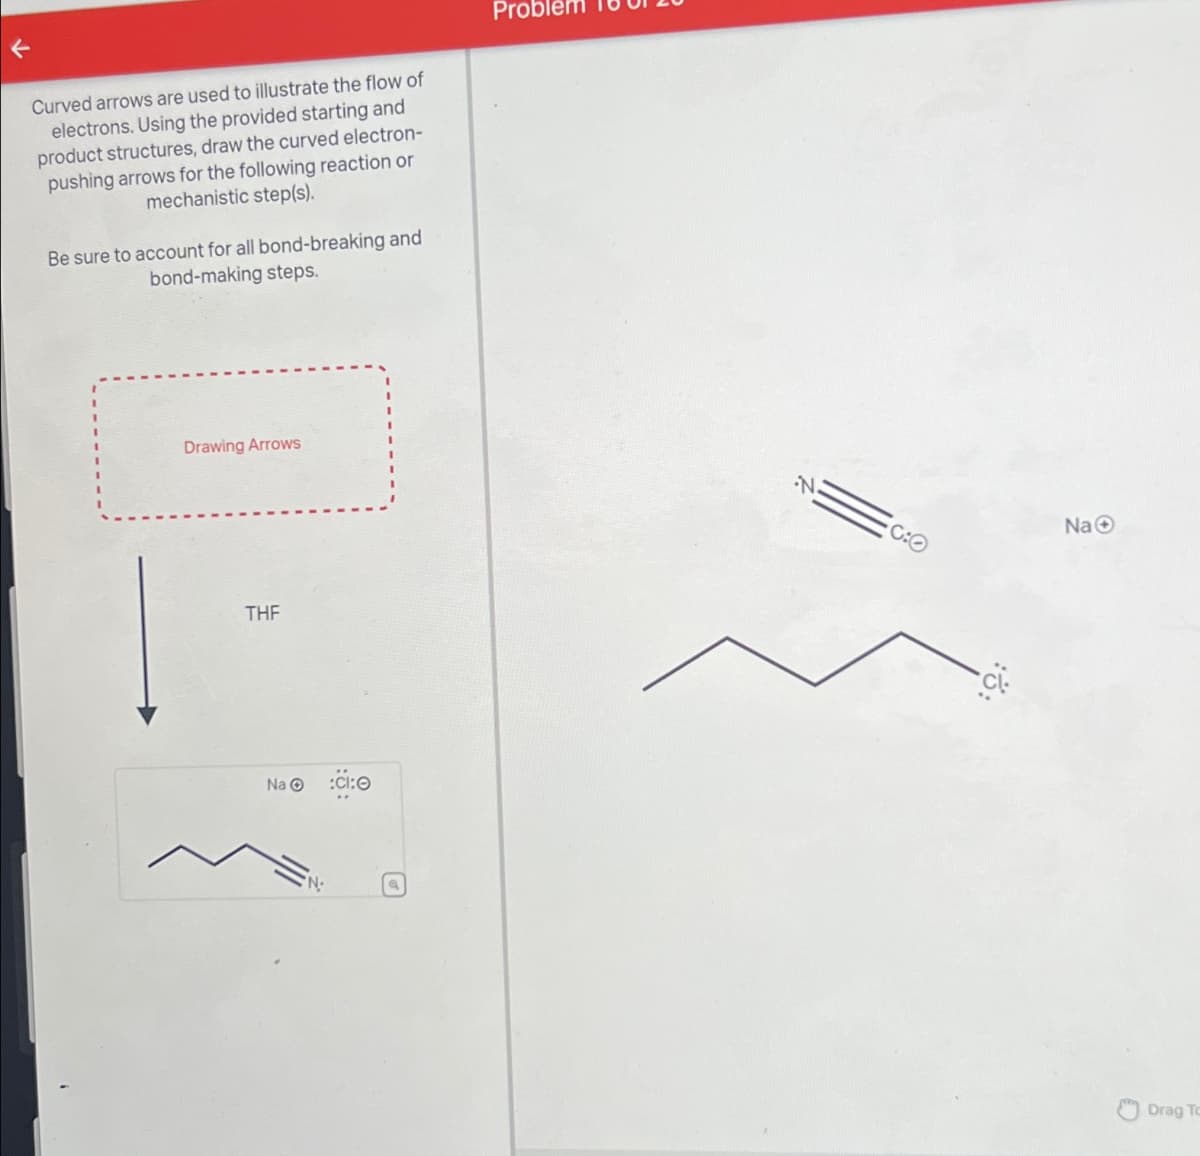 Curved arrows are used to illustrate the flow of
electrons. Using the provided starting and
product structures, draw the curved electron-
pushing arrows for the following reaction or
mechanistic step(s).
Be sure to account for all bond-breaking and
bond-making steps.
Probler
Drawing Arrows
THF
Na :Cl:O
'N.
NaO
C:O
Drag To